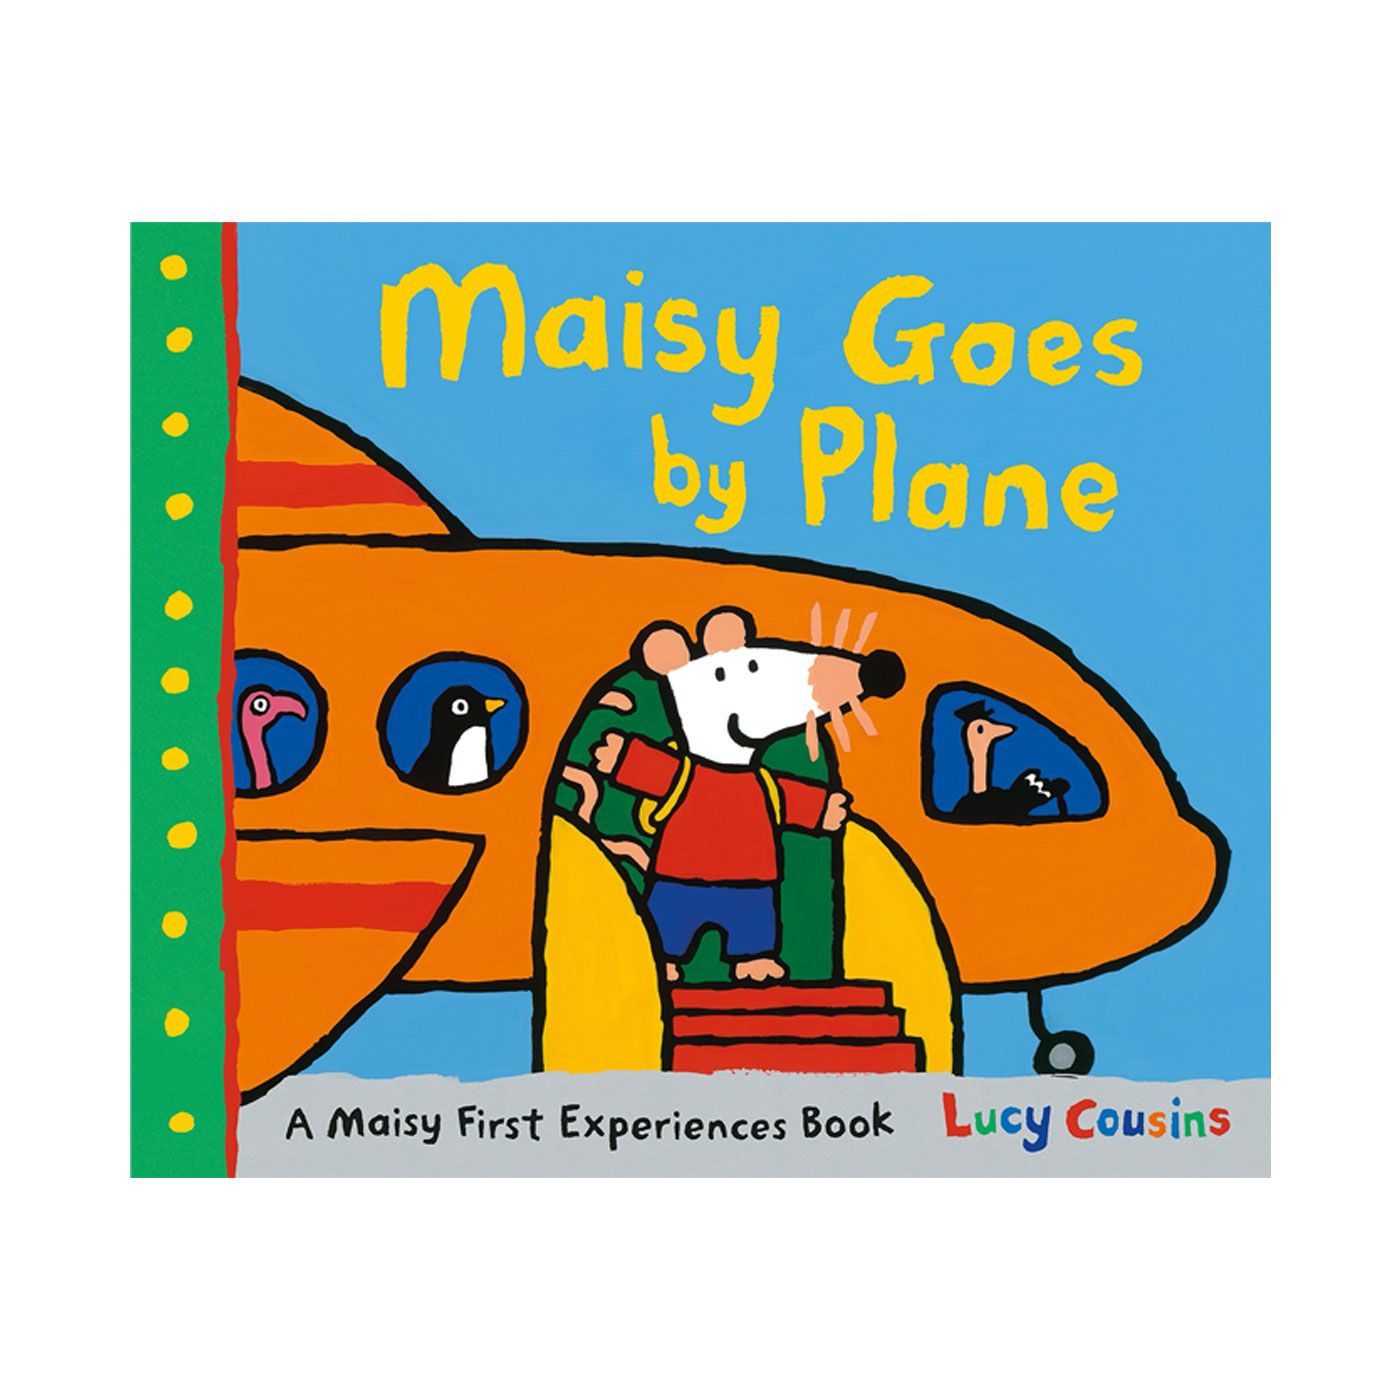  Maisy Goes By Plane